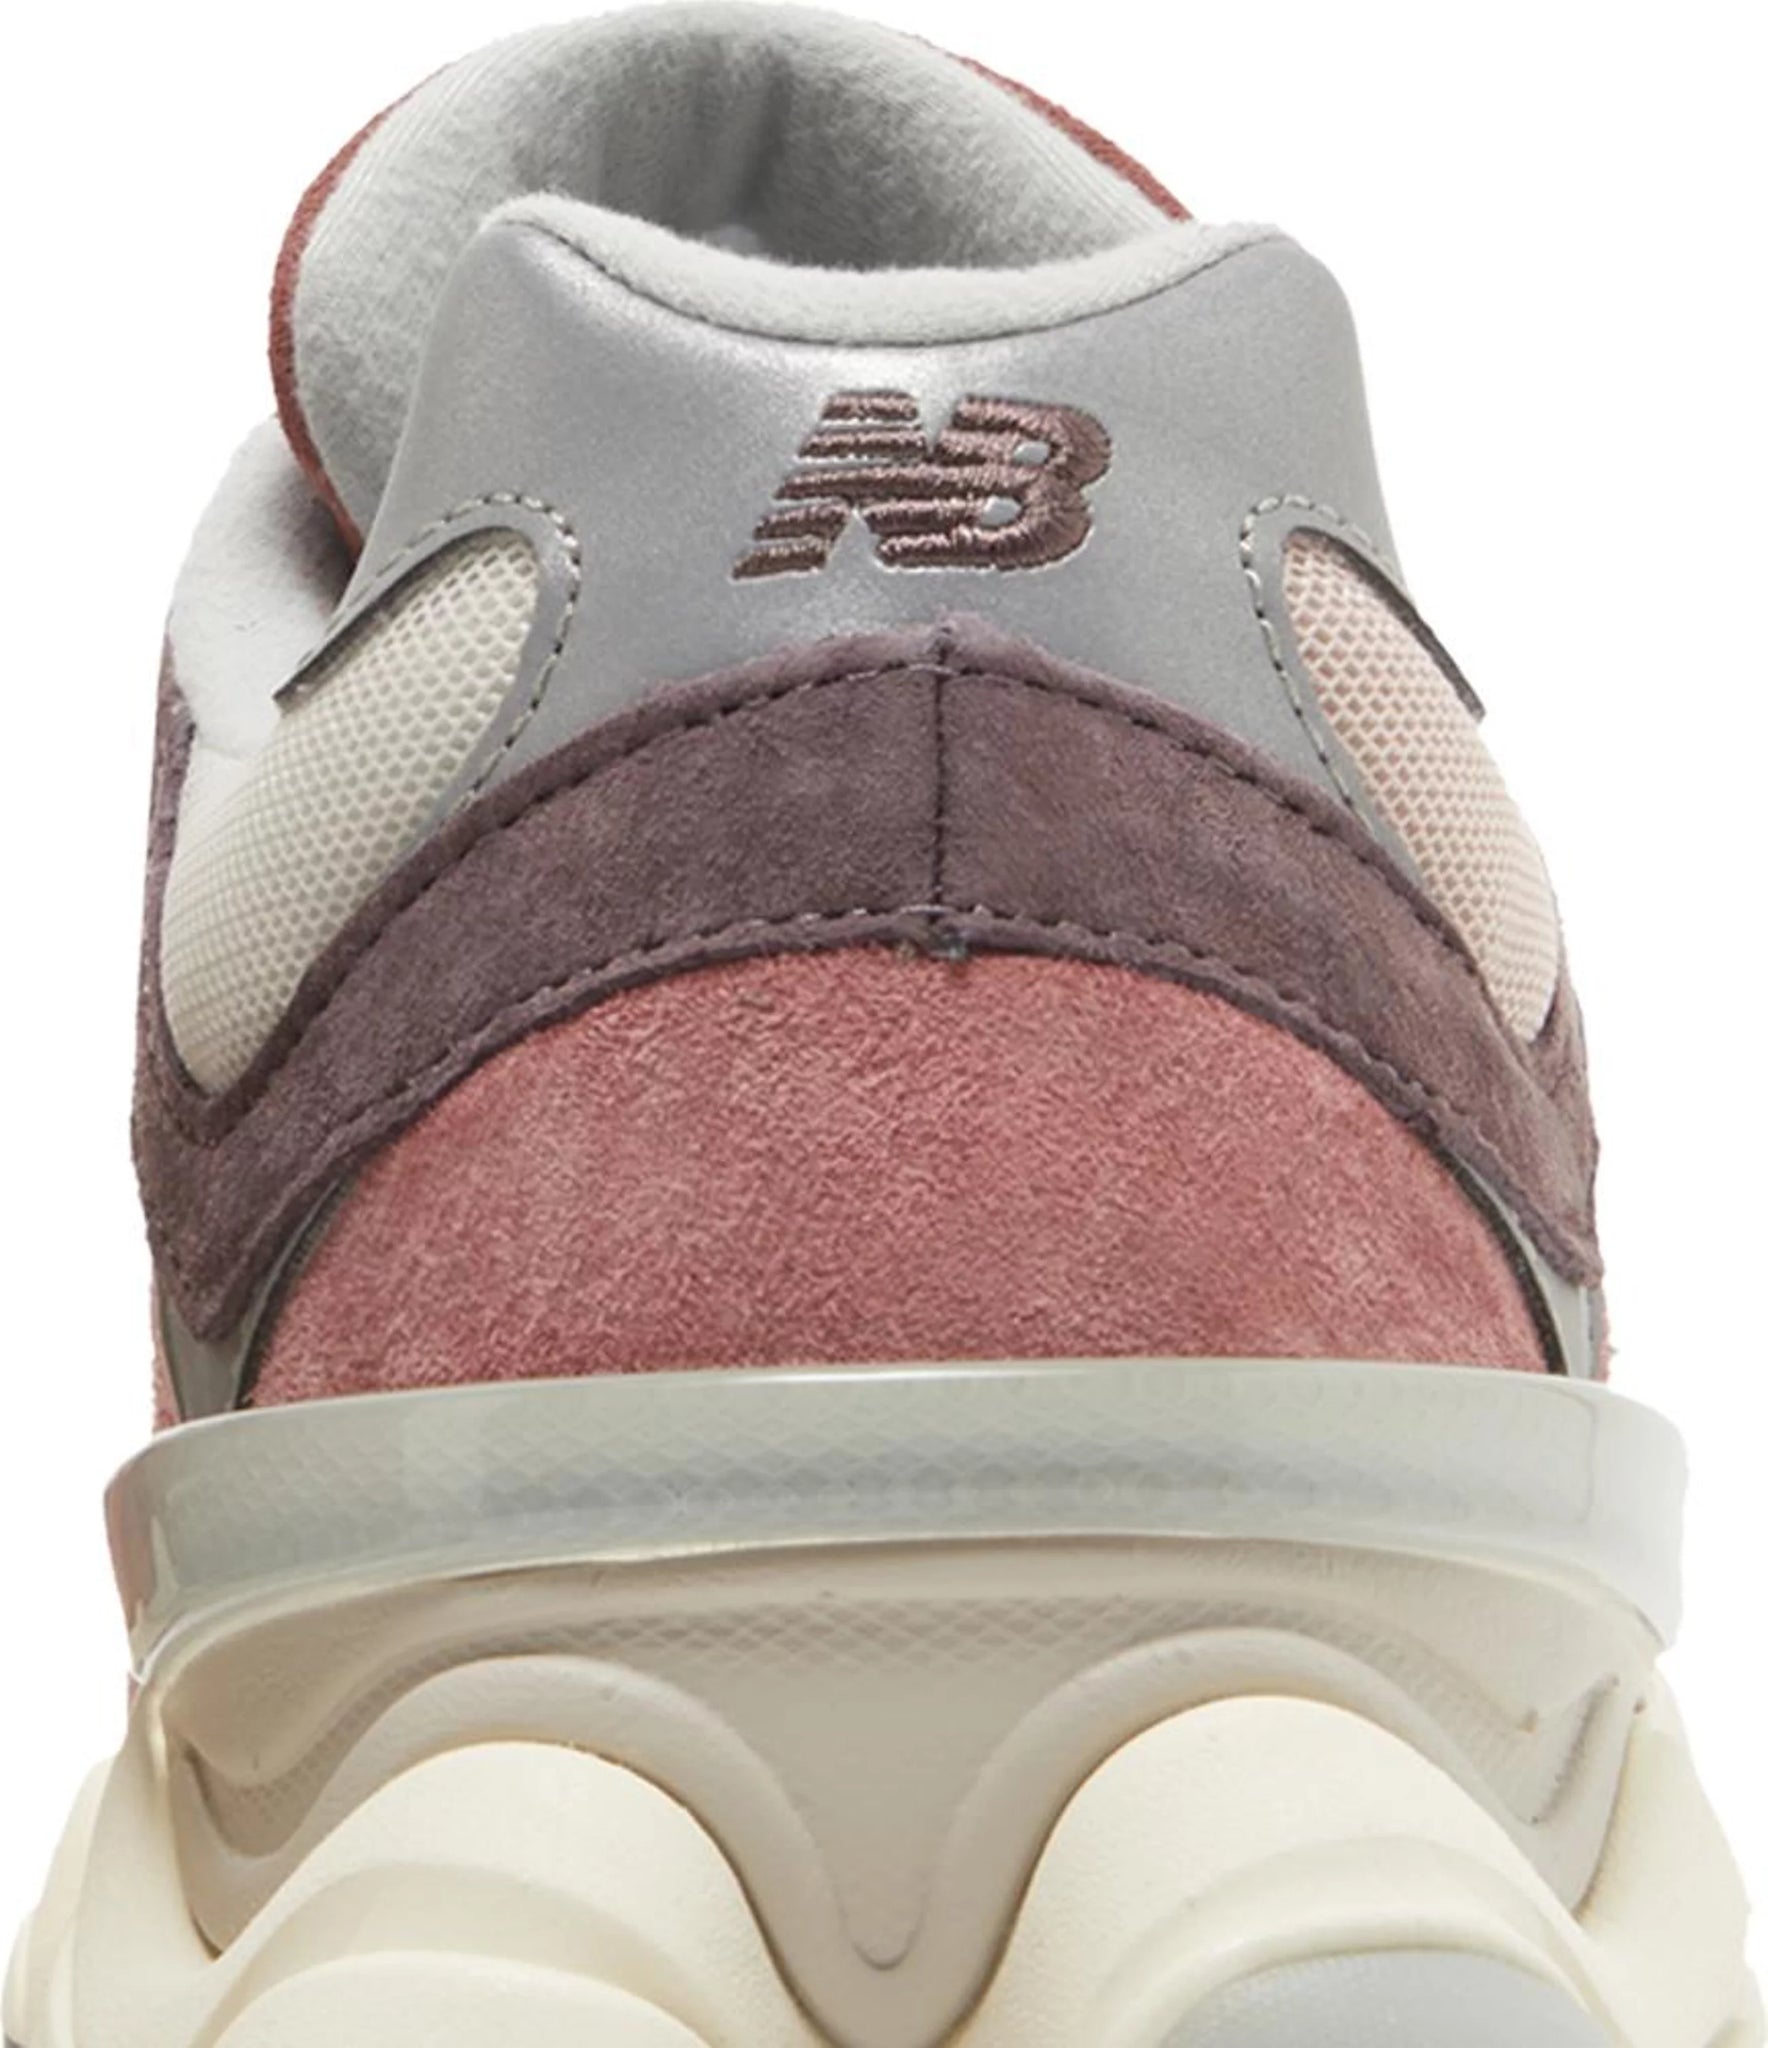 Double Boxed  299.99 New Balance 9060 Cherry Blossom Double Boxed